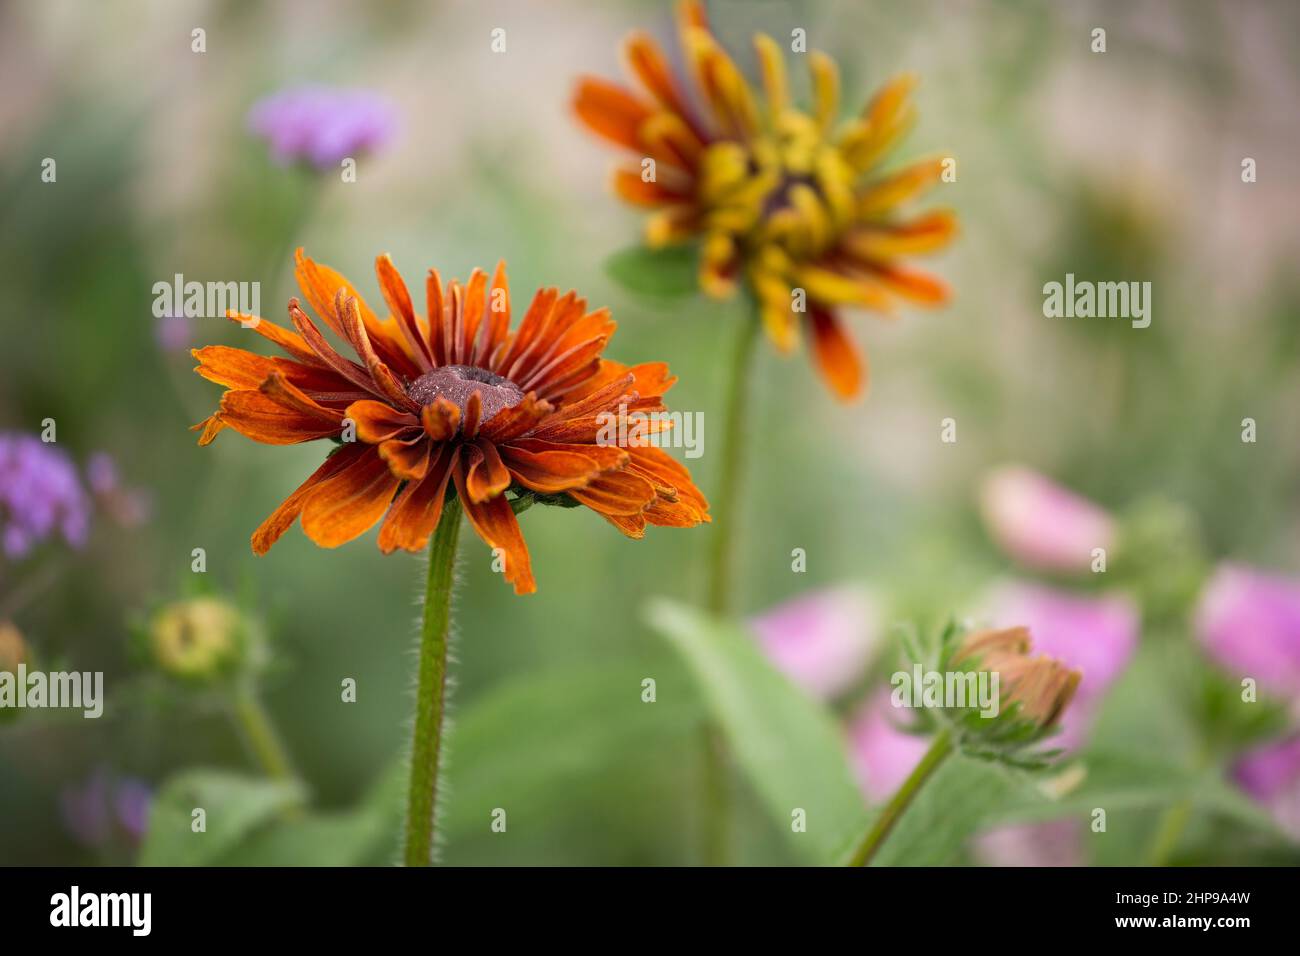 A sea of beautiful, colorful flowers in summertime Stock Photo